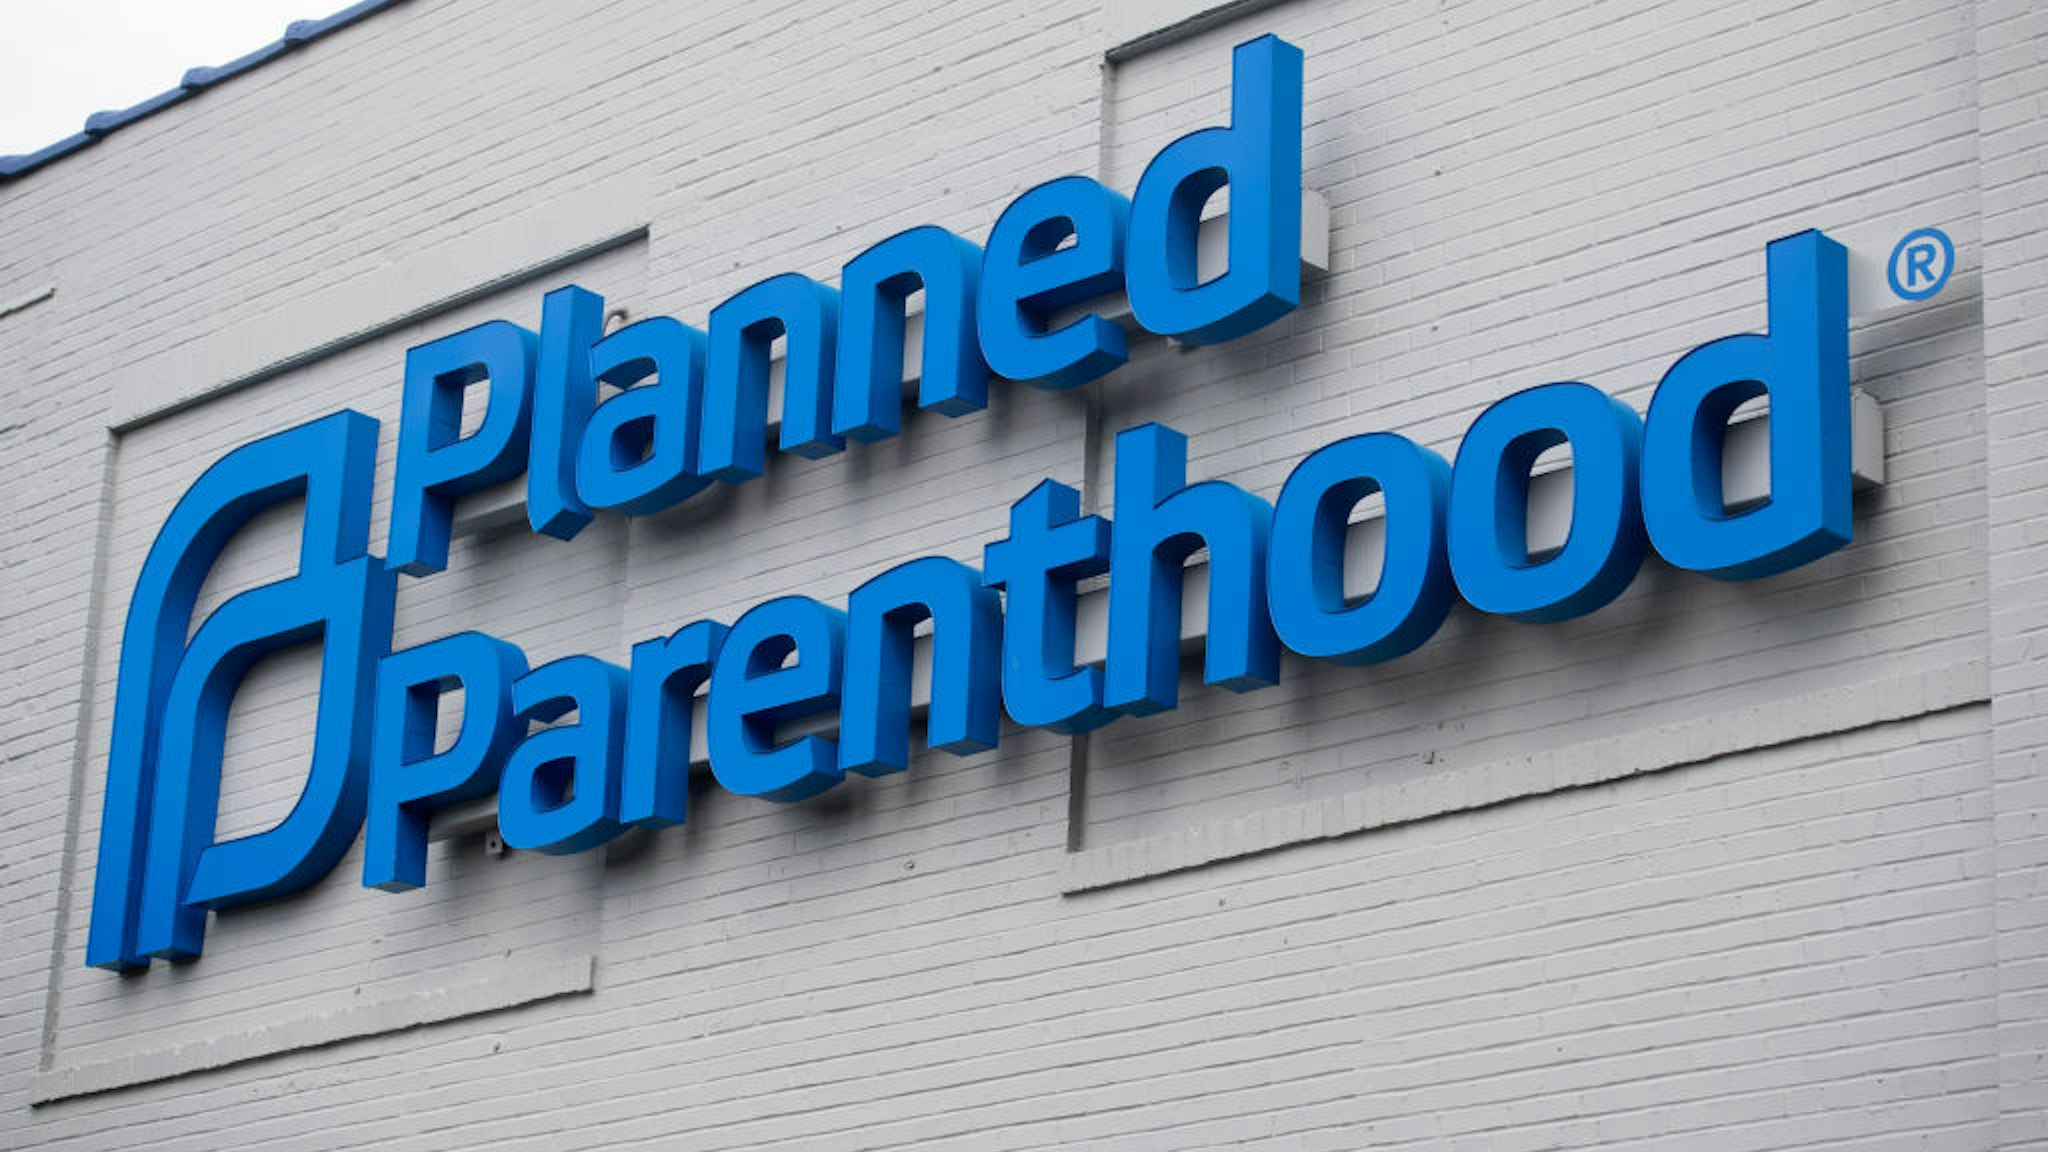 The logo of Planned Parenthood is seen outside the Planned Parenthood Reproductive Health Services Center in St. Louis, Missouri, May 30, 2019, the last location in the state performing abortions. - A US court weighed the fate of the last abortion clinic in Missouri on May 30, with the state hours away from becoming the first in 45 years to no longer offer the procedure amid a nationwide push to curtail access to abortion.